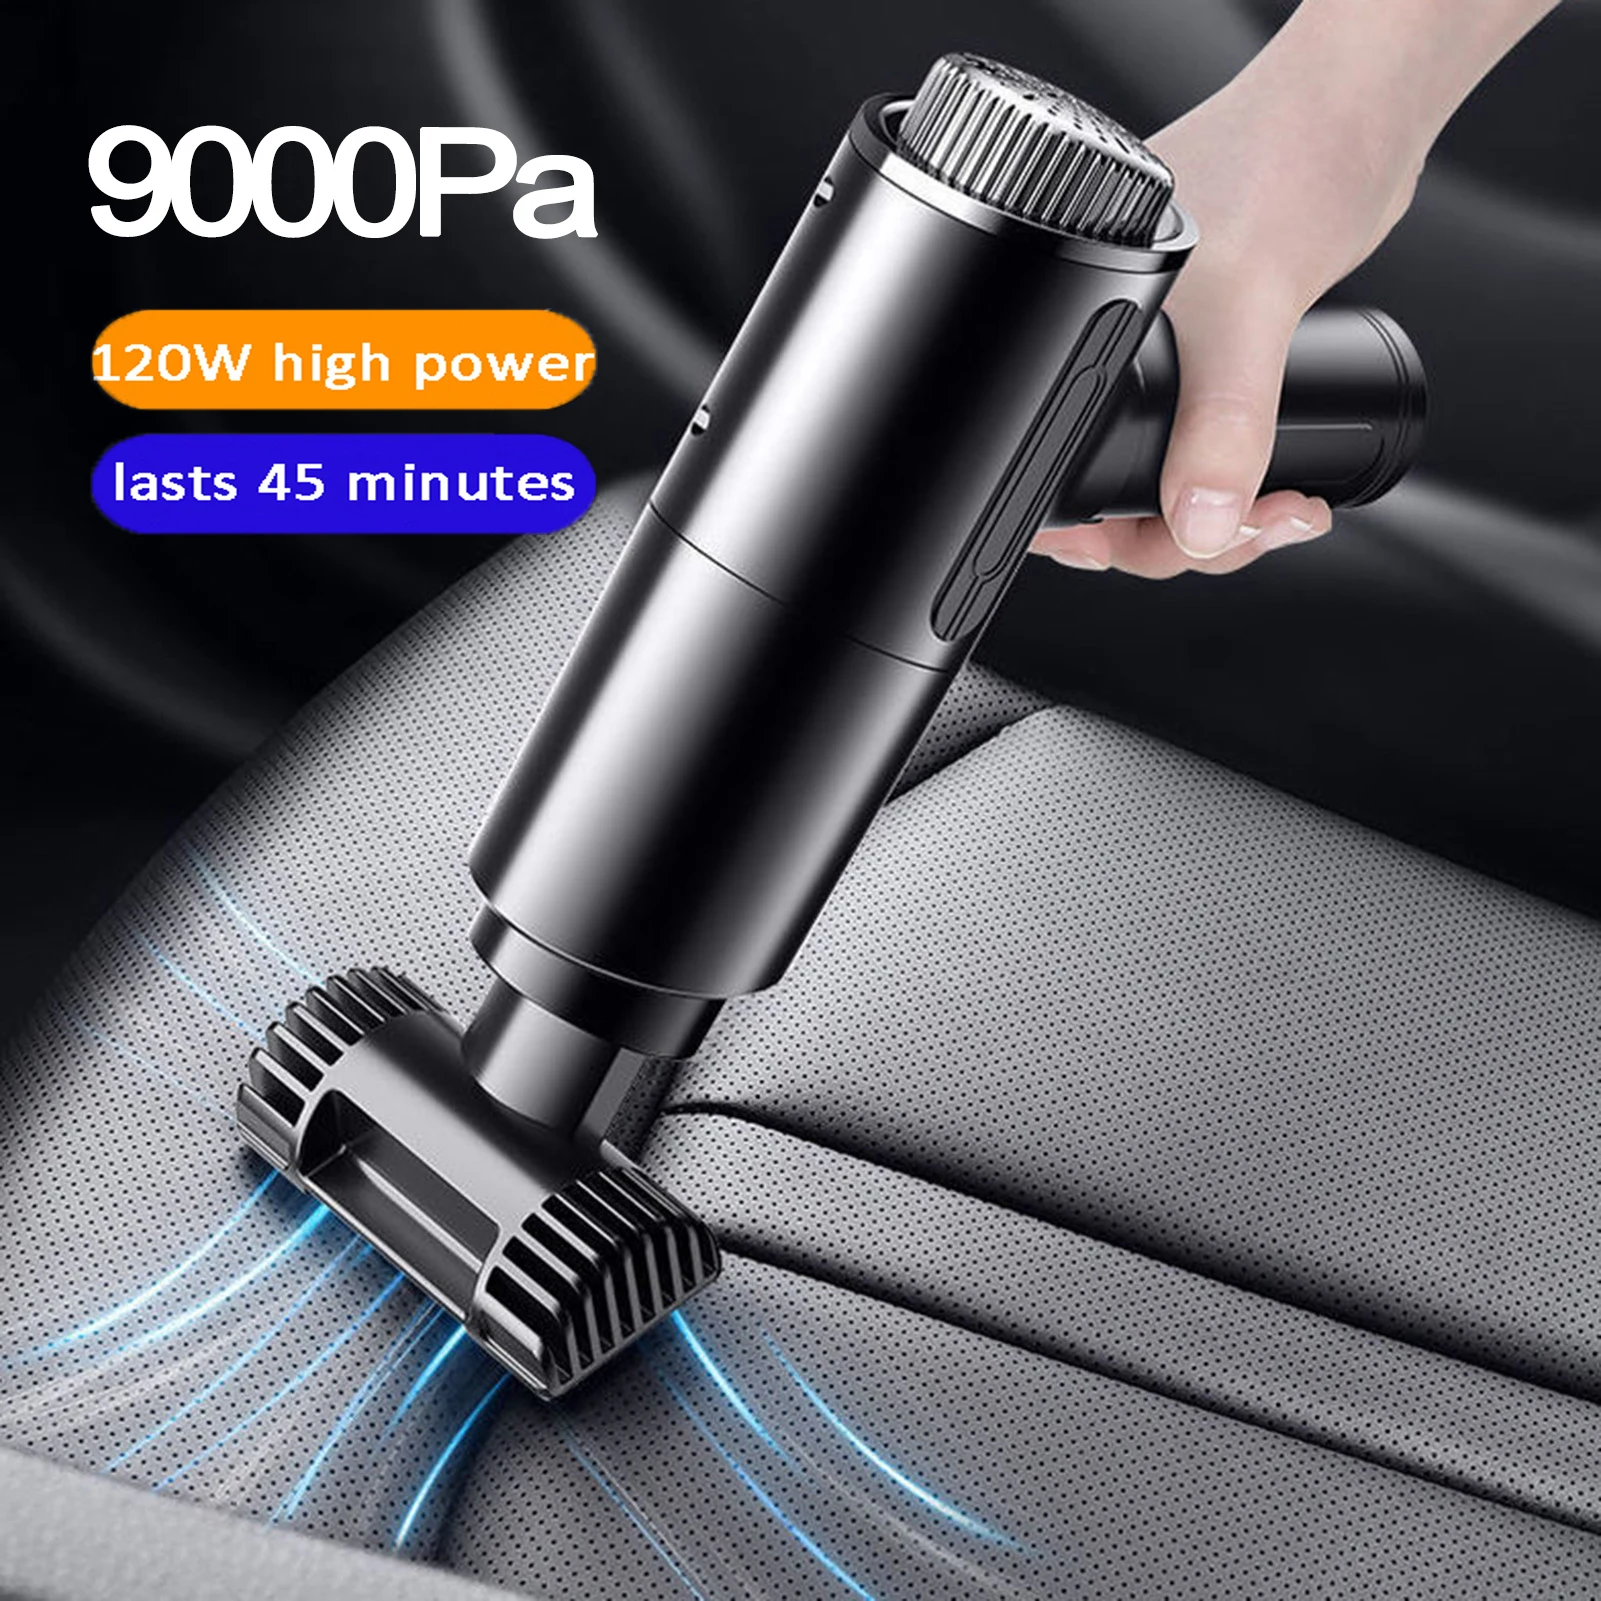 

Car Mini Cordless Vacuum Cleaner 9000Pa Cleaning Machine Wireless Vacuum Cleaners Handheld Portable Car Cleaning Home Appliance